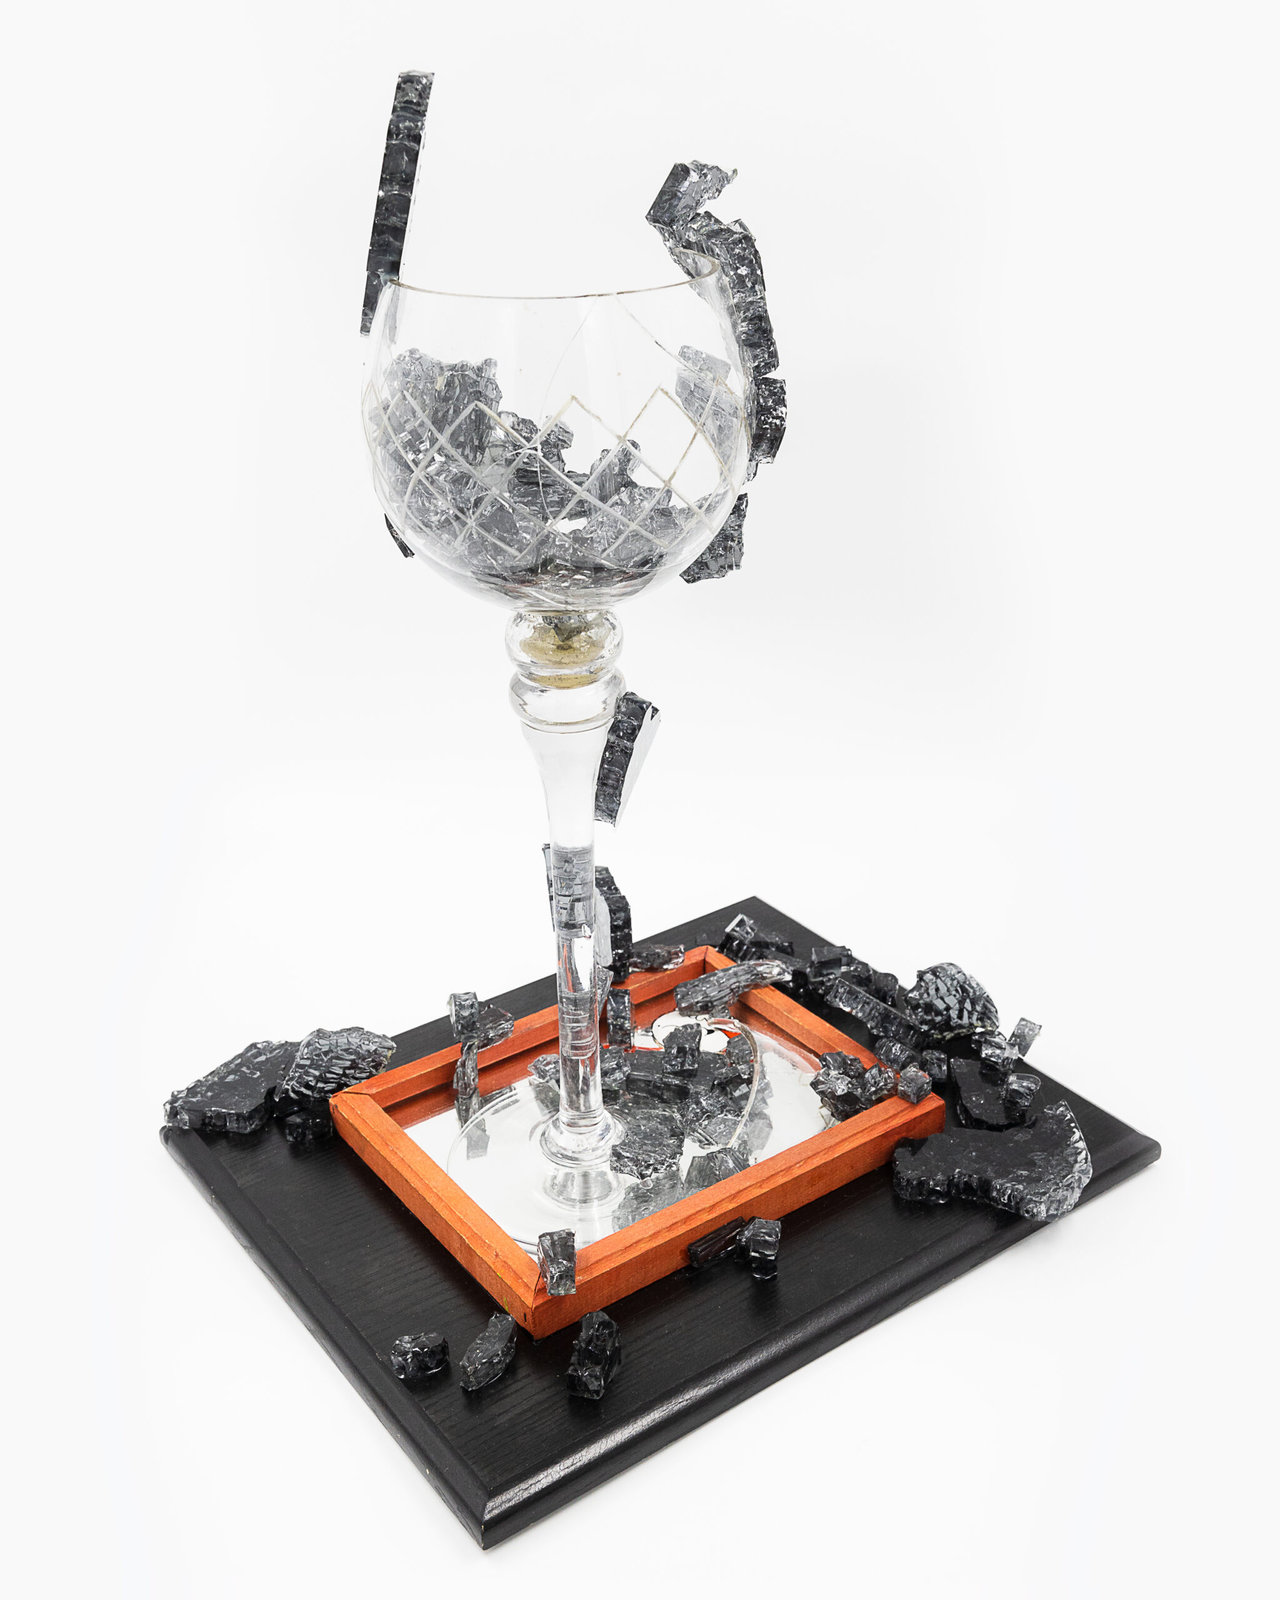 Tall candle holder (without the candle) in the shape of a champagne glass, is broken and reconstructed. Chunks of black shattered glass appear to burst out of it. The champagne glass stands on a red wood-framed mirror made by Tom Wilson (tm) and pieces of shattered black glass are strewn about. All this sits on a black wooden base.